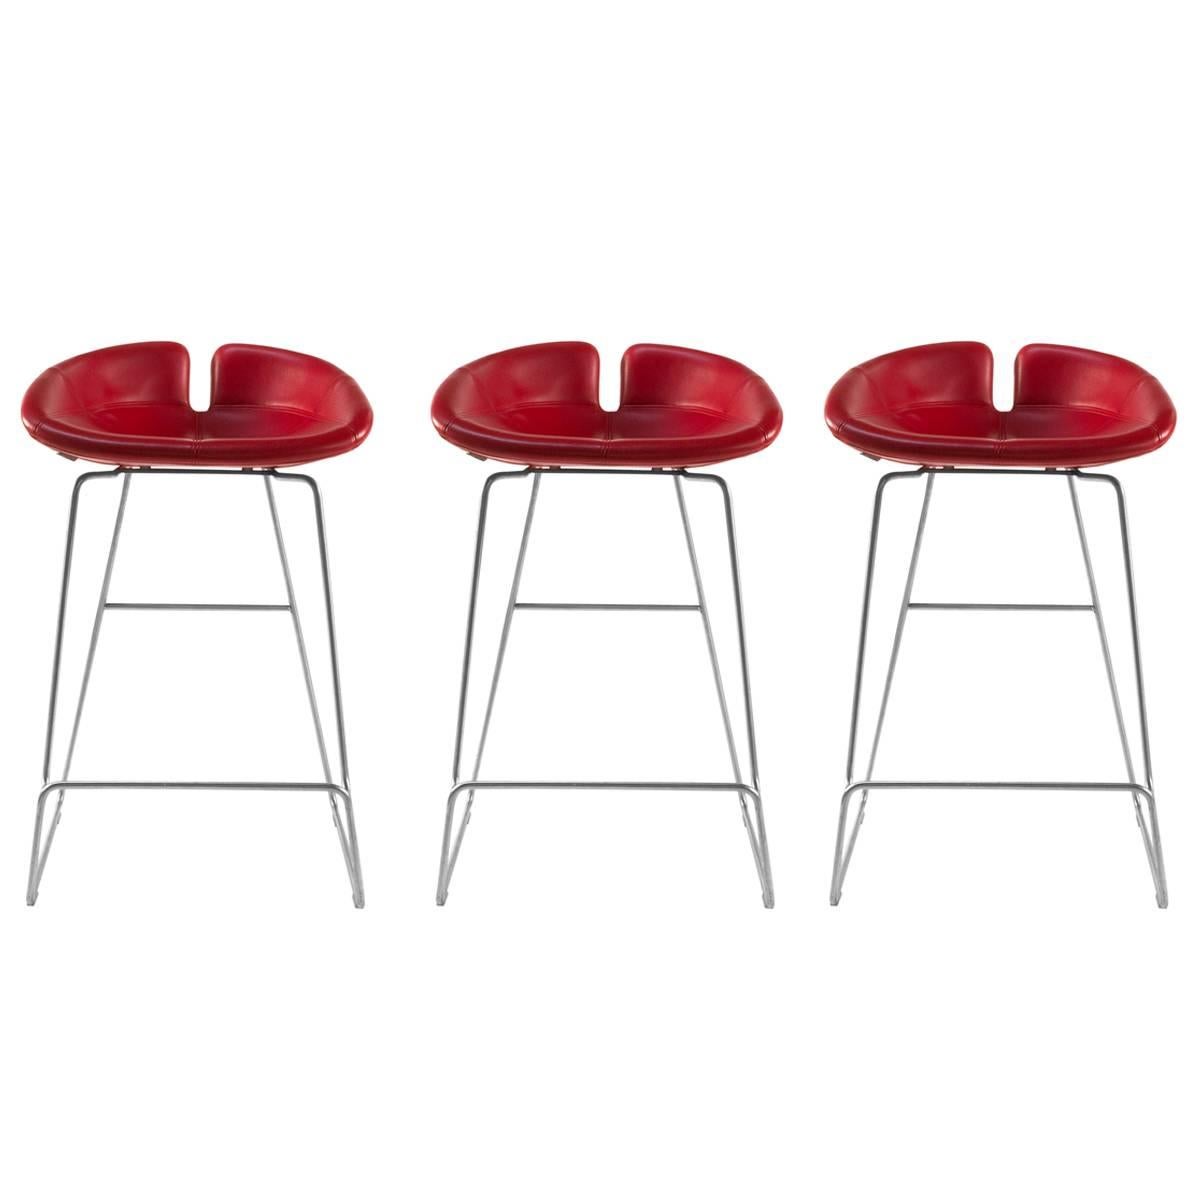 Moroso Red Leather Fjord Low Bar Stools by Patricia Urquiola, Italy For Sale